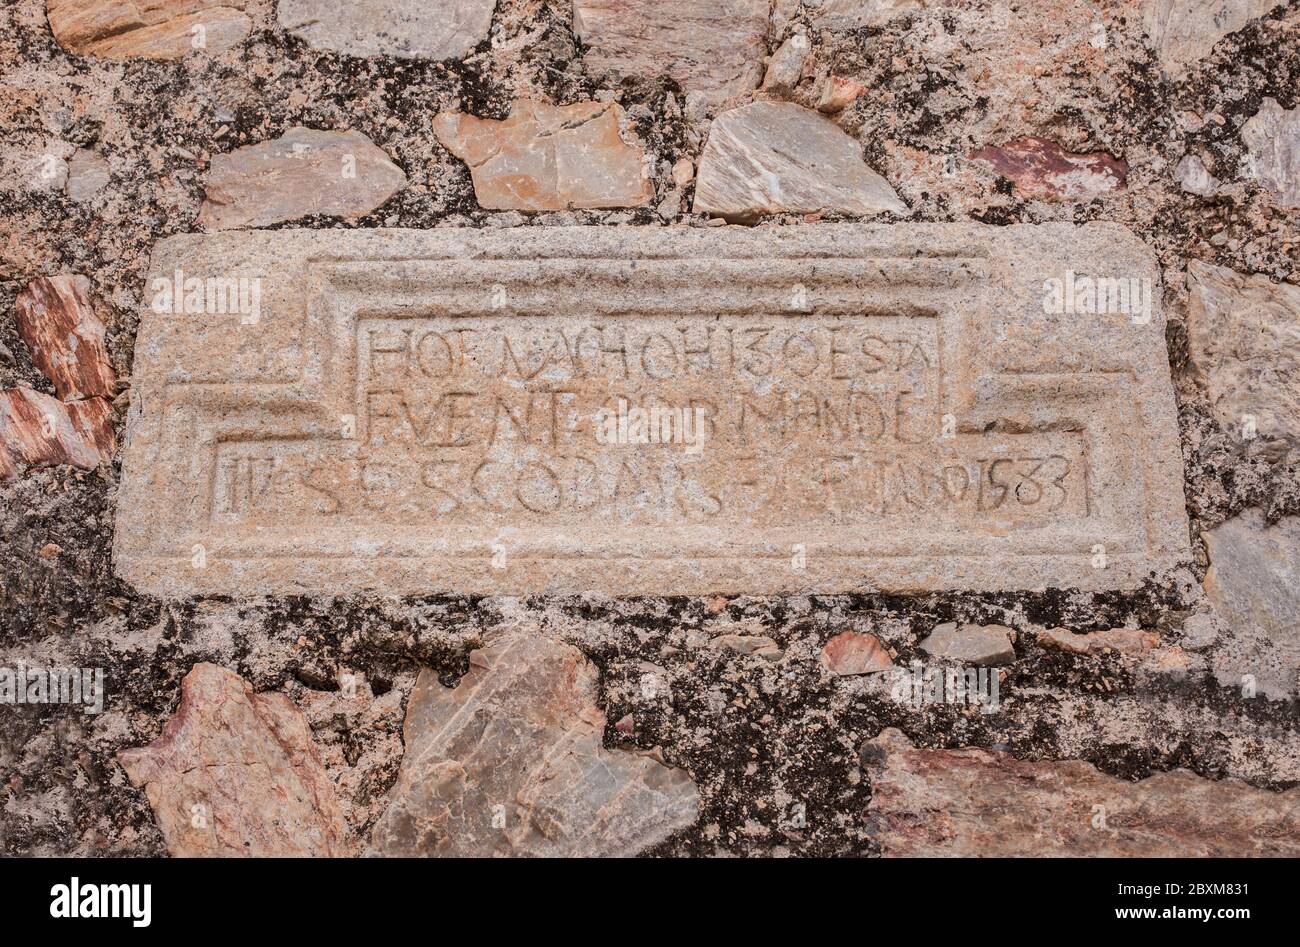 Traditional fountain of Los Moros spring, Hornachos, Spain. Fundational inscription carved in granite, 1583 Stock Photo